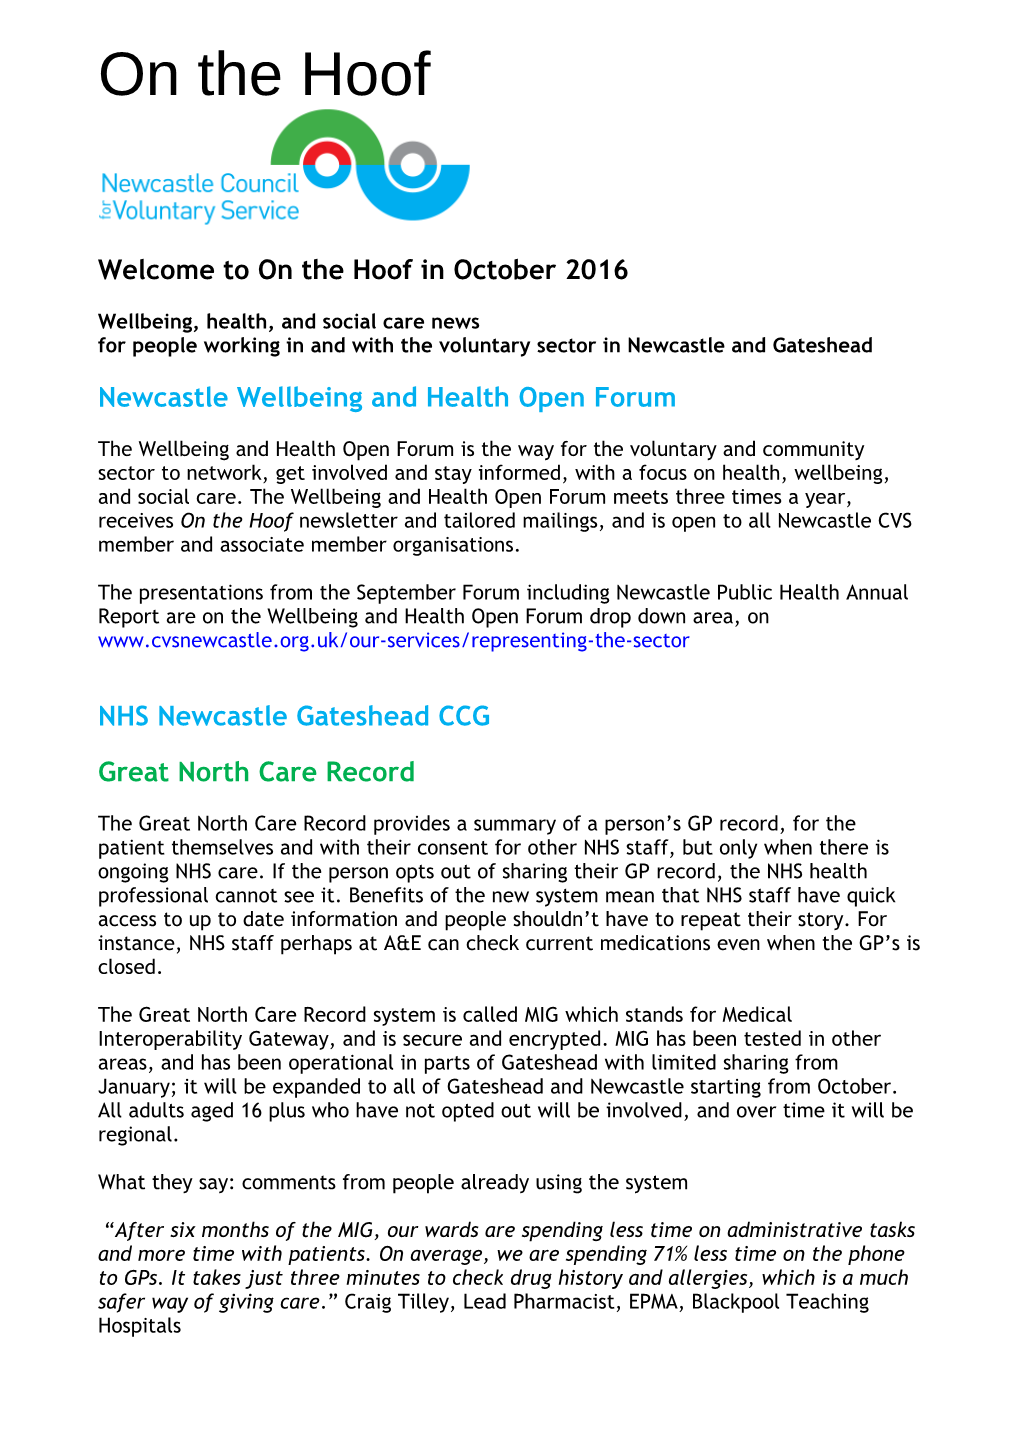 Wellbeing, Health, and Social Care News